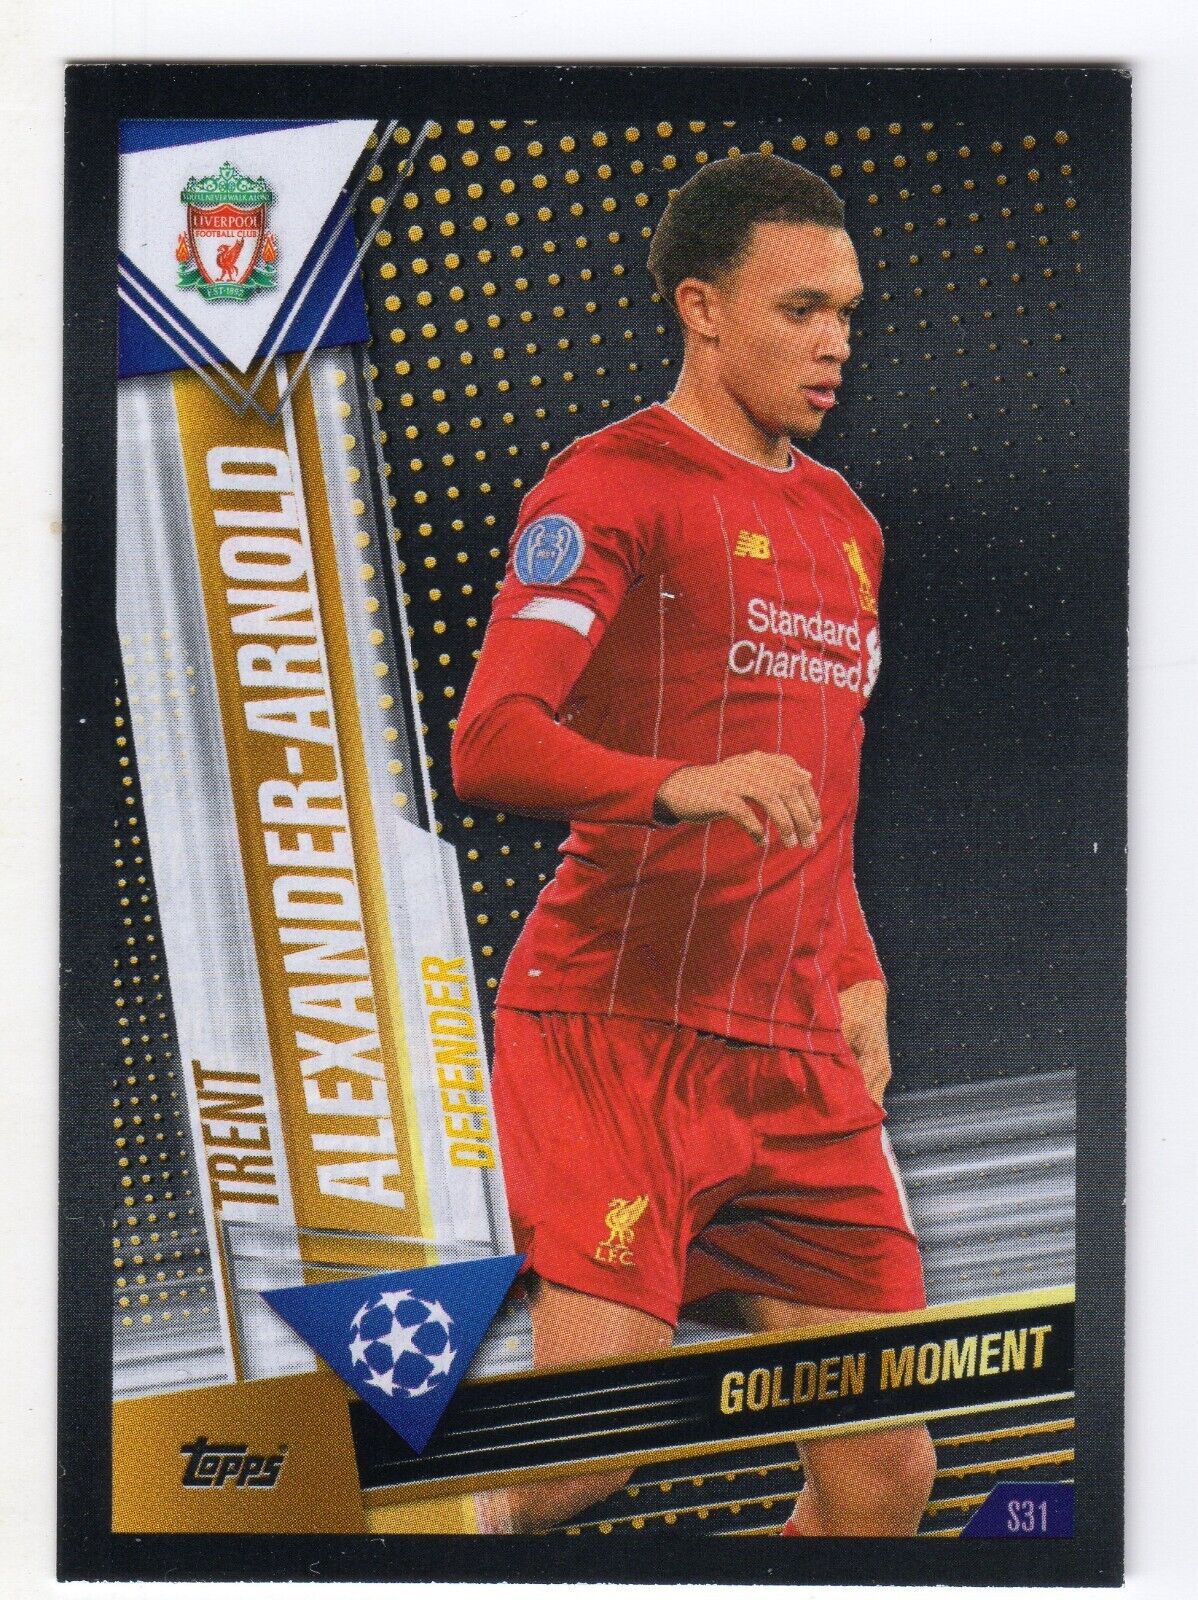 TOPPS PREMIER GOLD / MATCH ATTAX / EXTRA / GOLDEN MOMENTS - CARD OF CHOICE